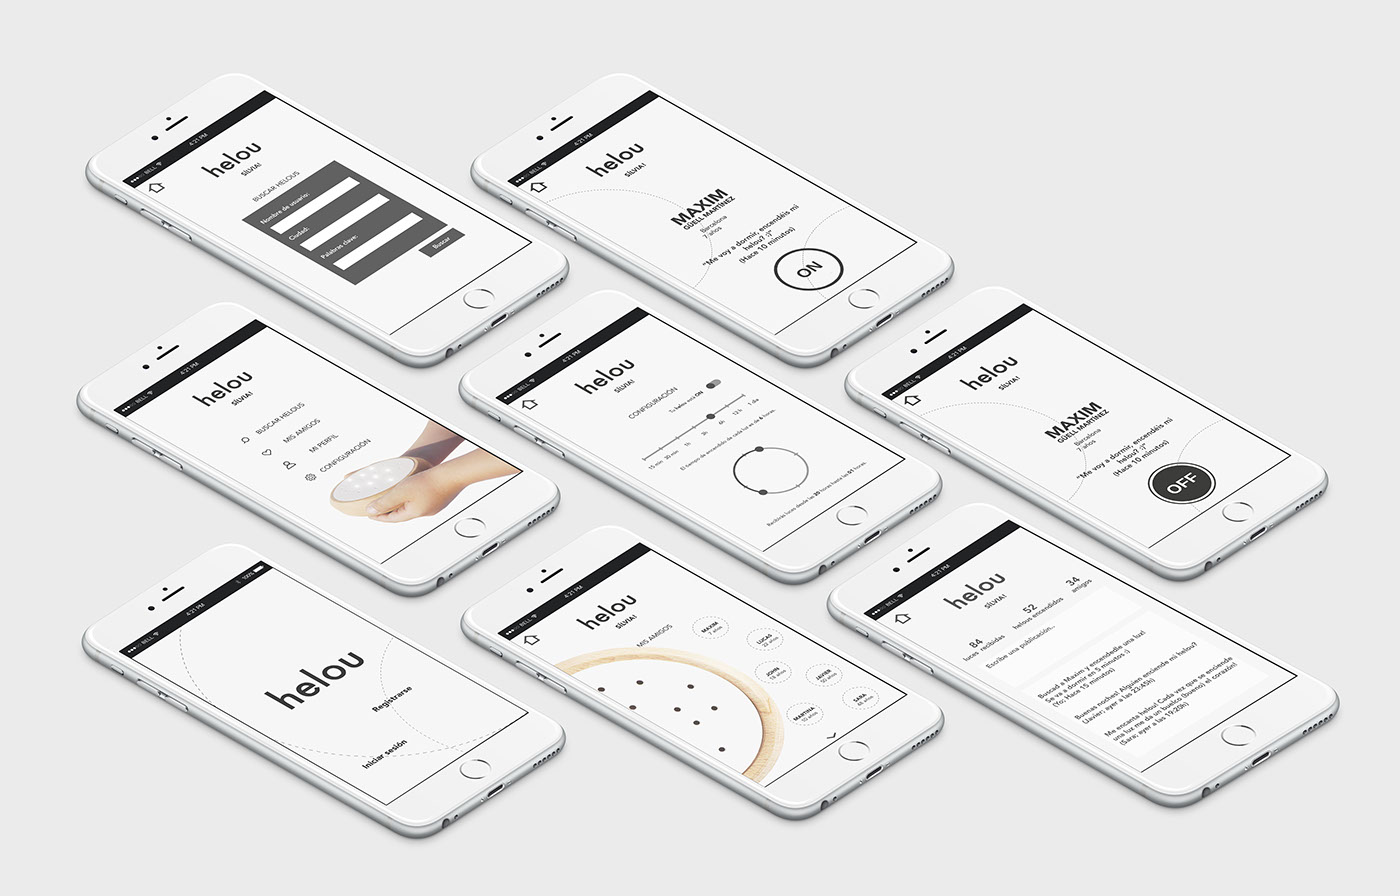 helou product design Experience light interaction people app